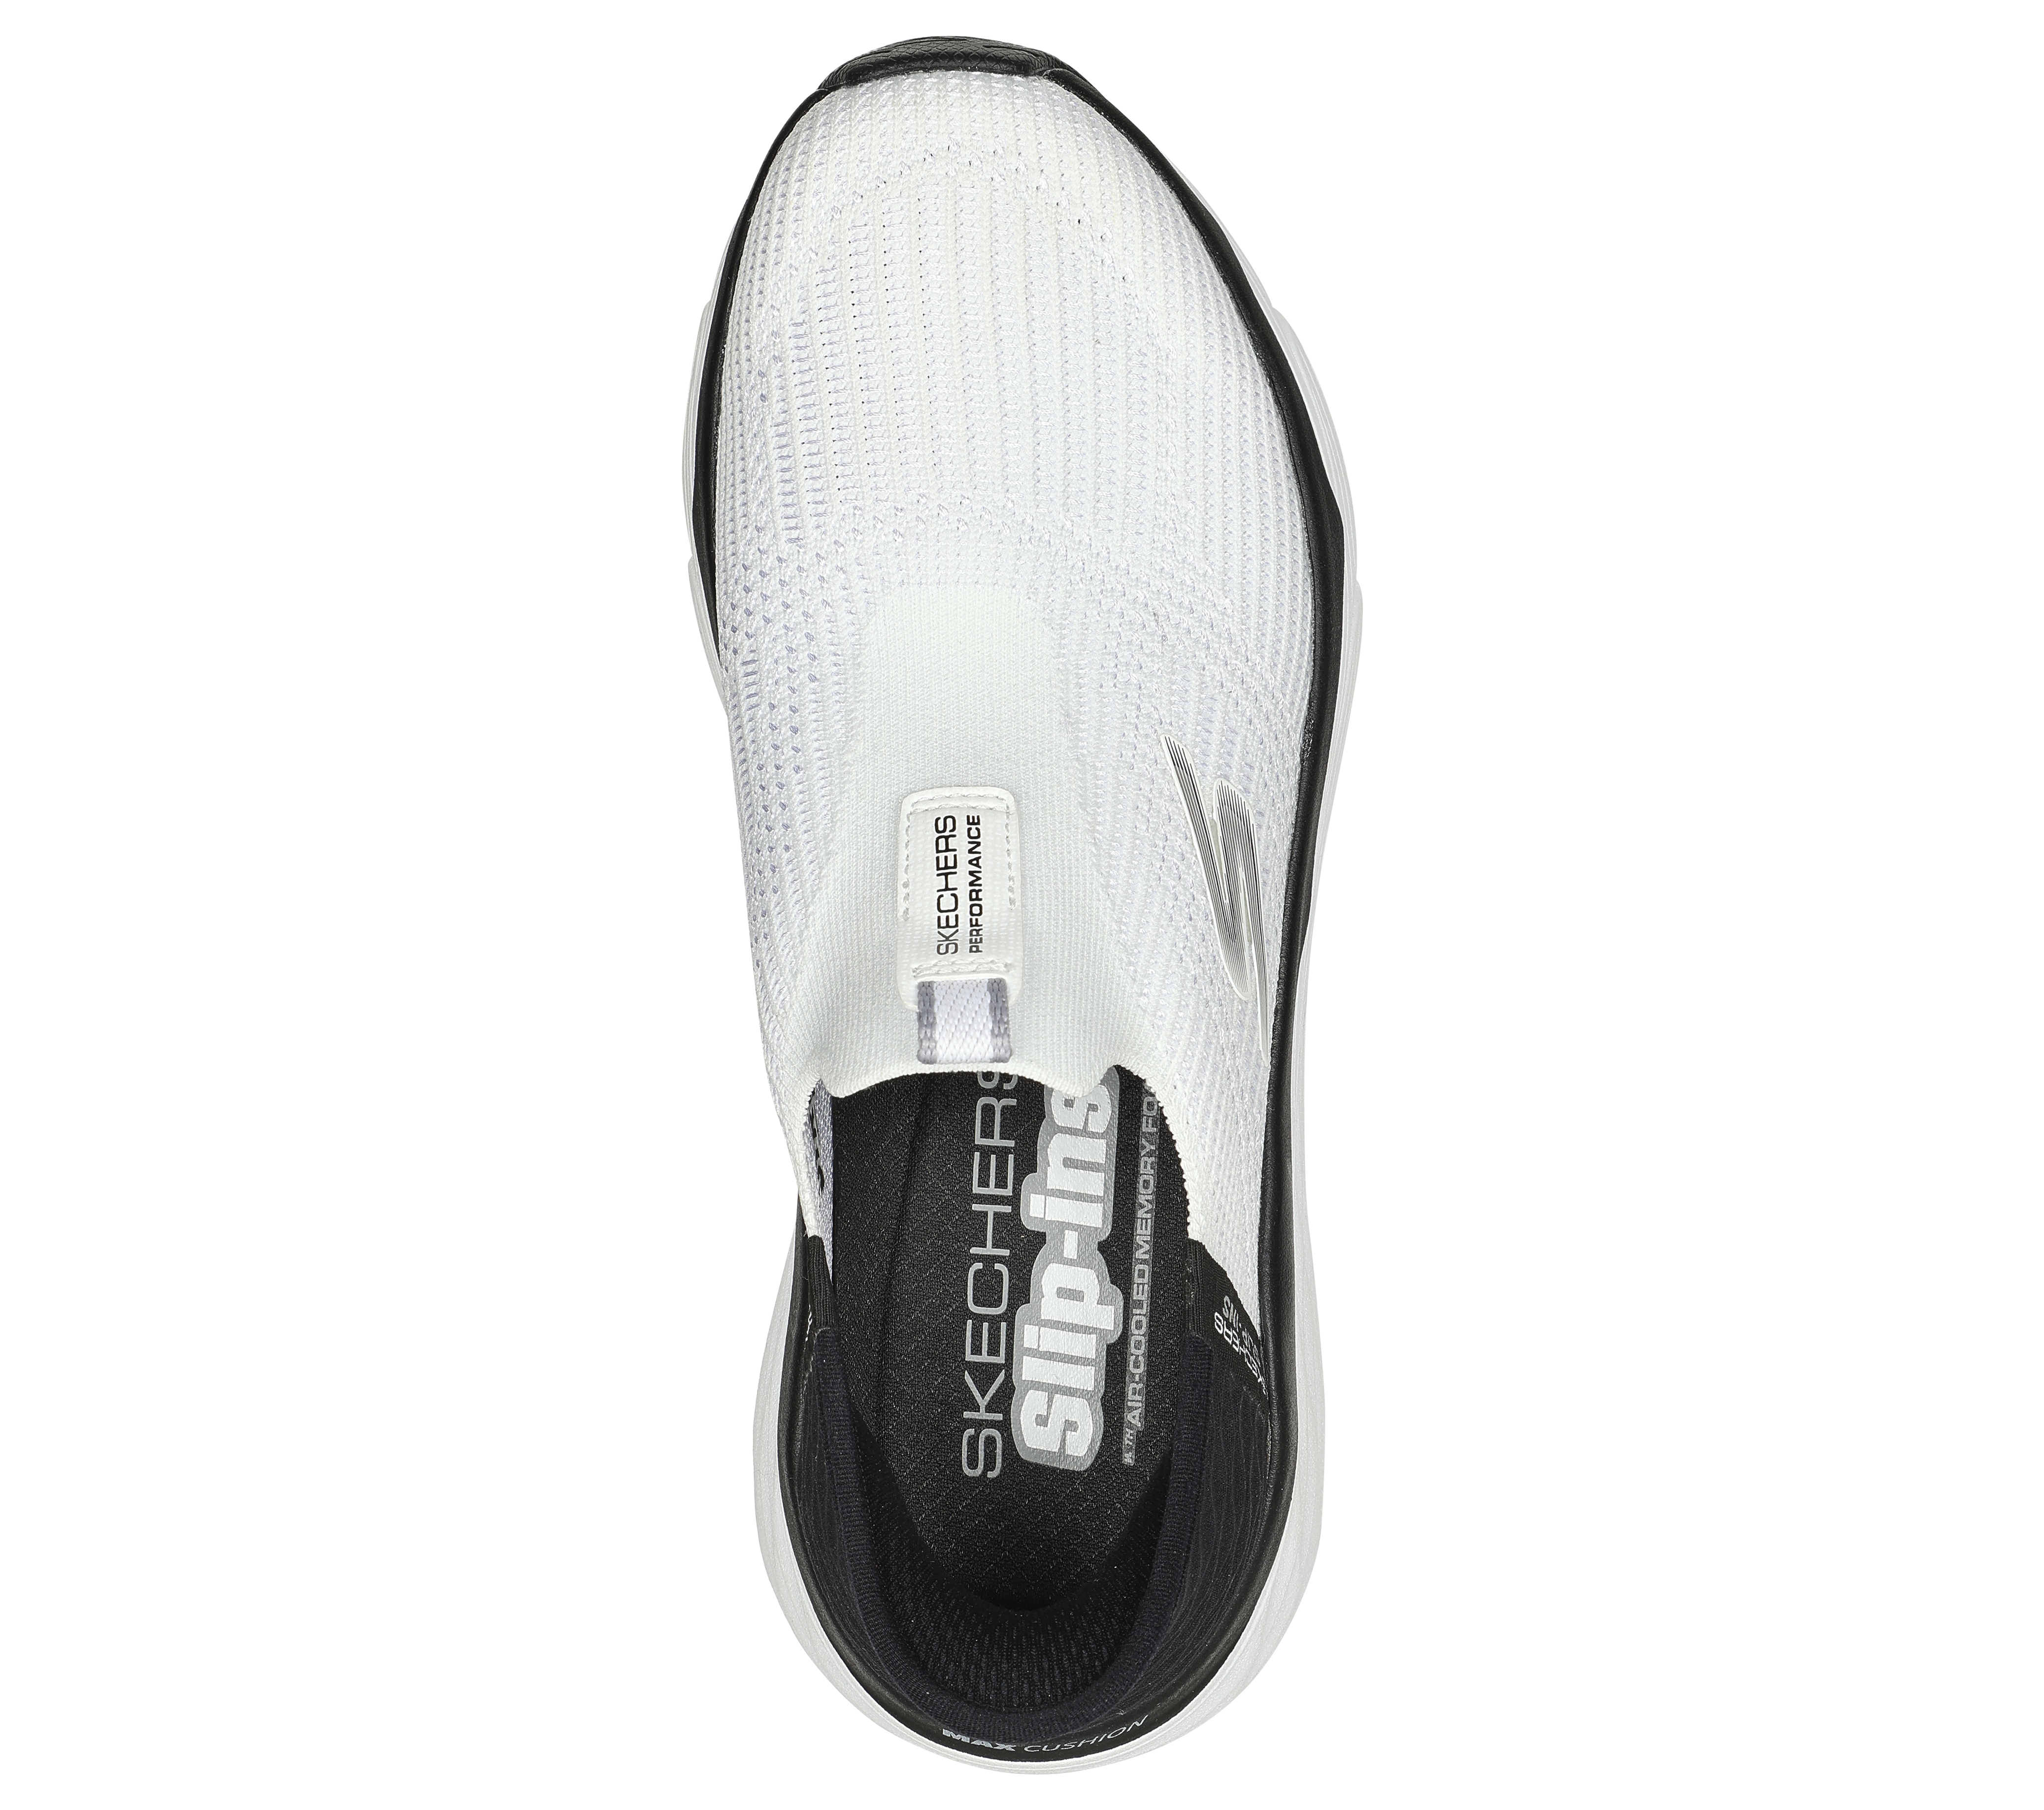 Shop the Skechers Slip-ins: Max Cushioning - Smooth